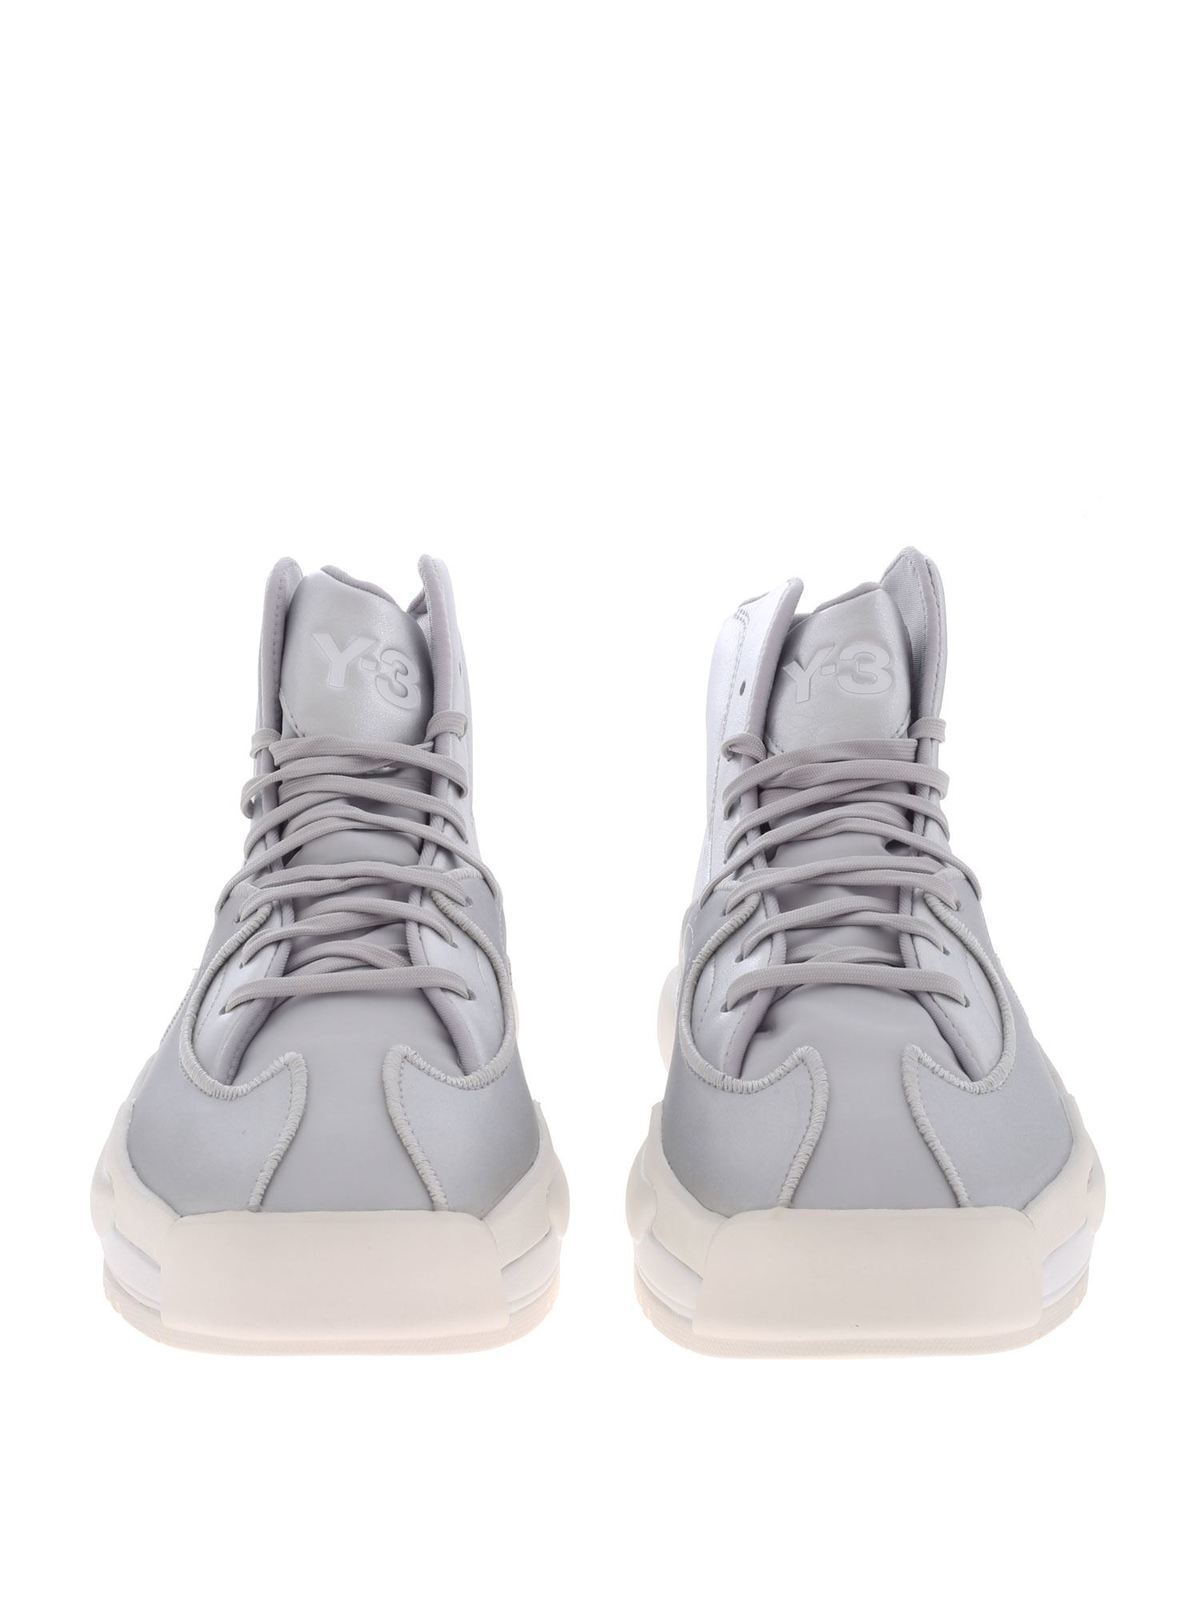 silver y3 trainers